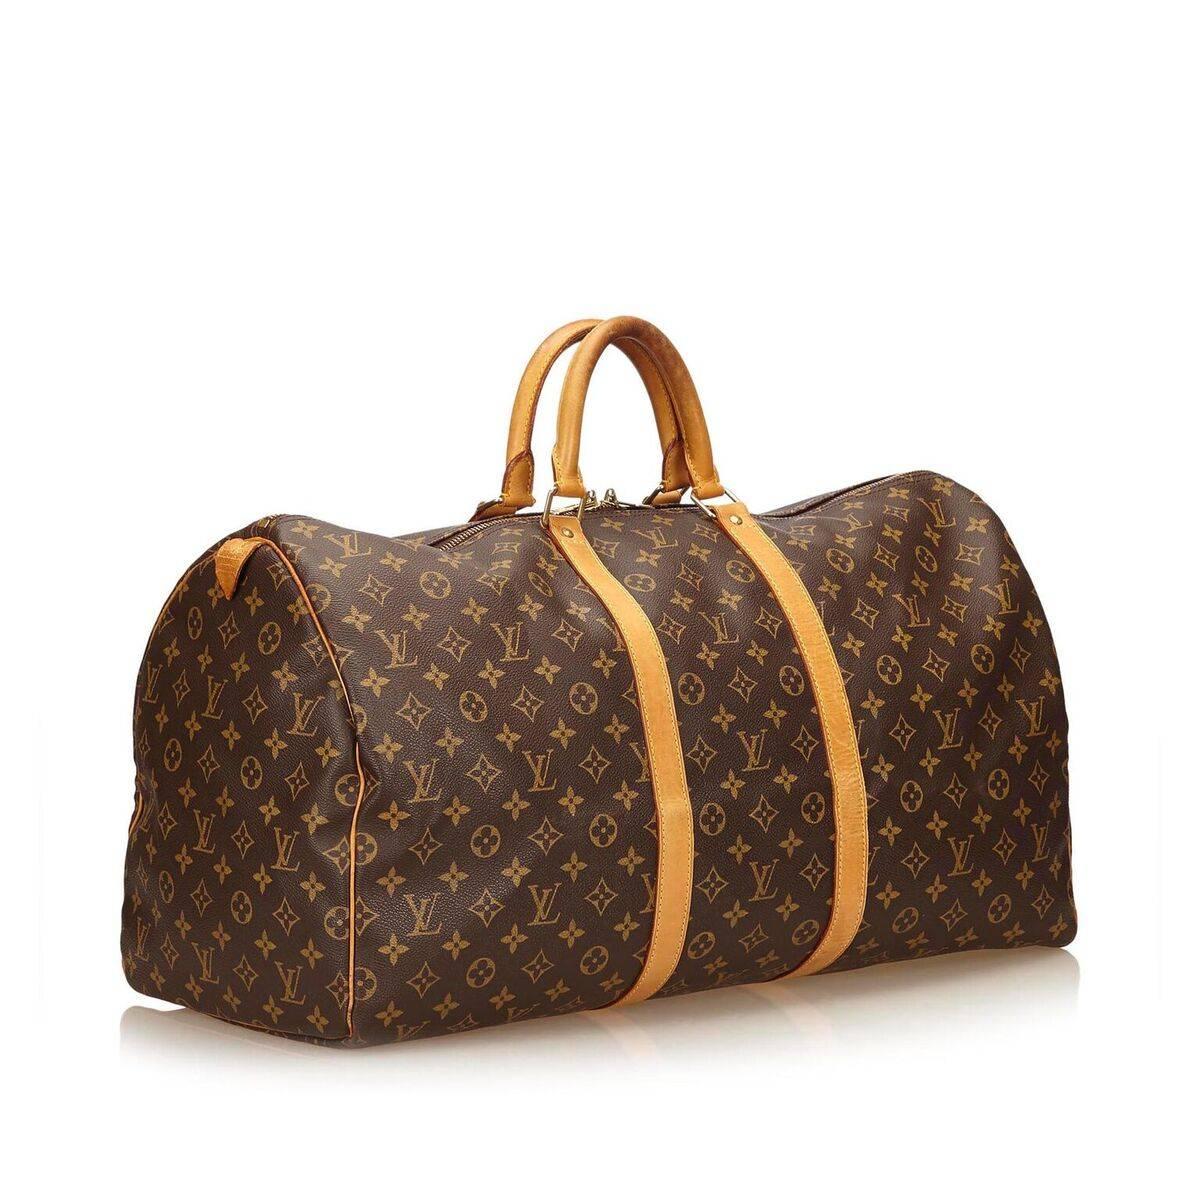 Product details:  Brown coated canvas monogram Keepall 55 duffel bag by Louis Vuitton.  Trimmed with tan leather.  Dual carry handles.  Top dual zip closure.  Goldtone hardware.  22